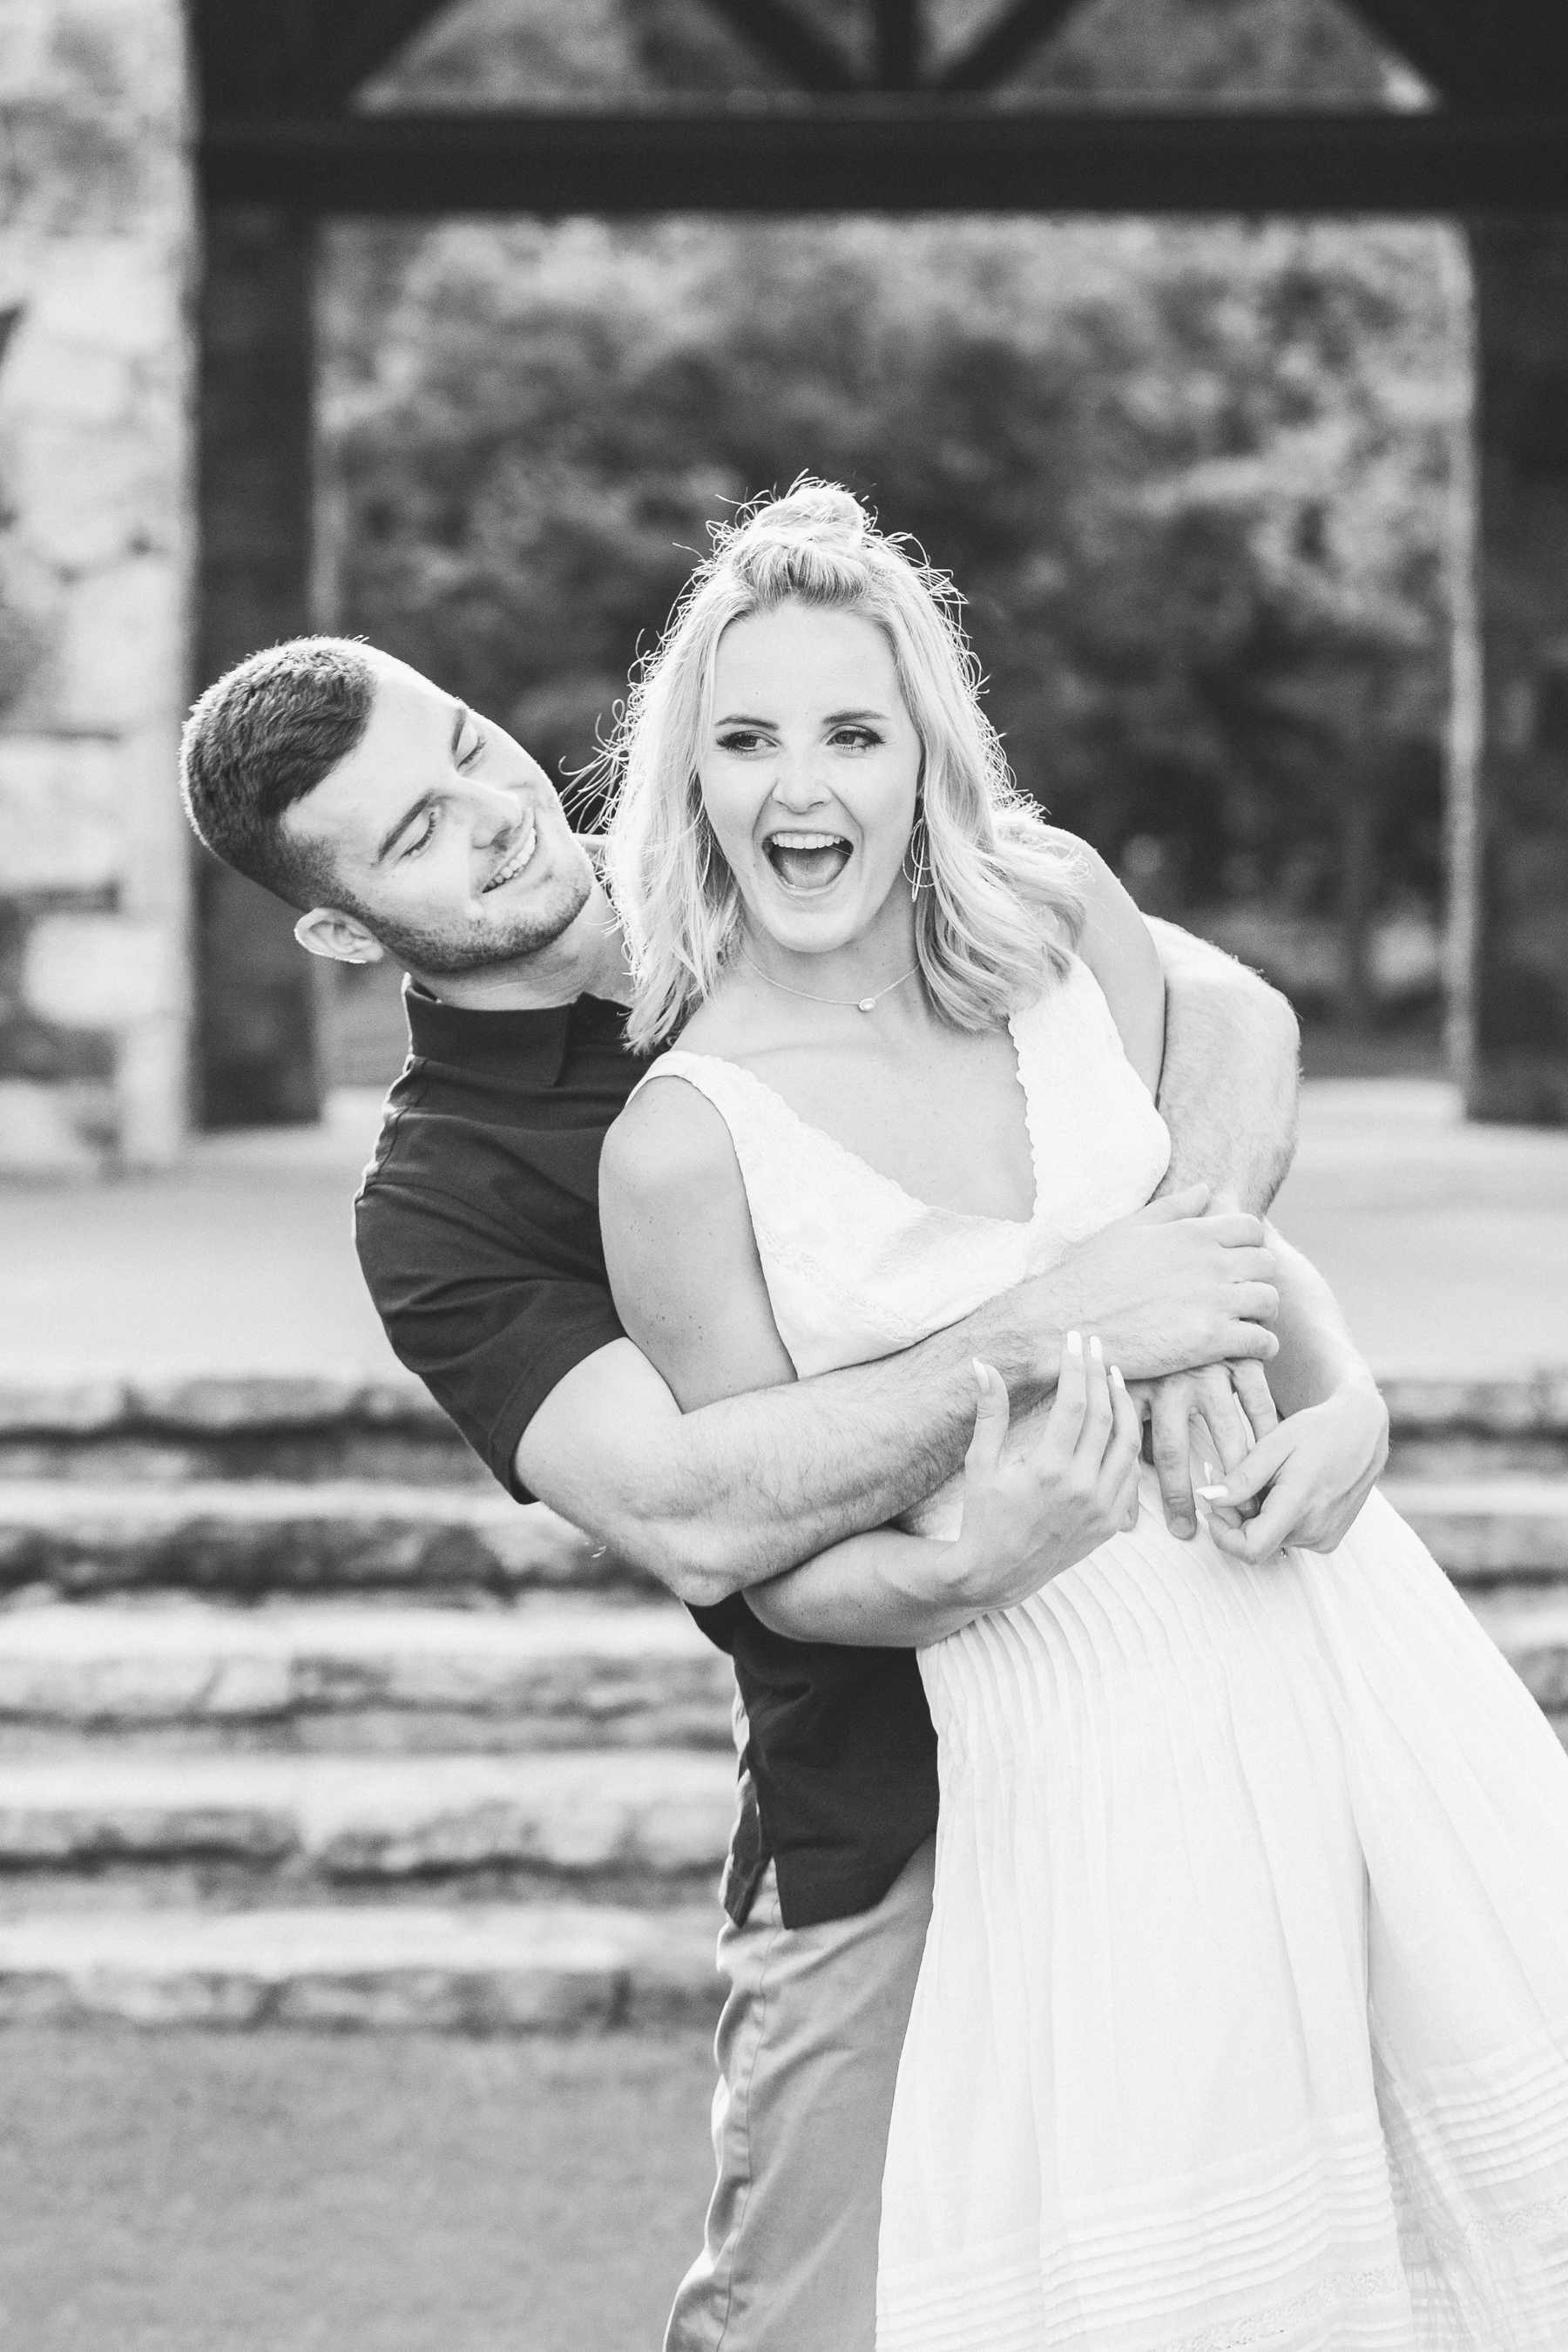 If fun engagement photos are your thing, find a photographer who feels the same way!